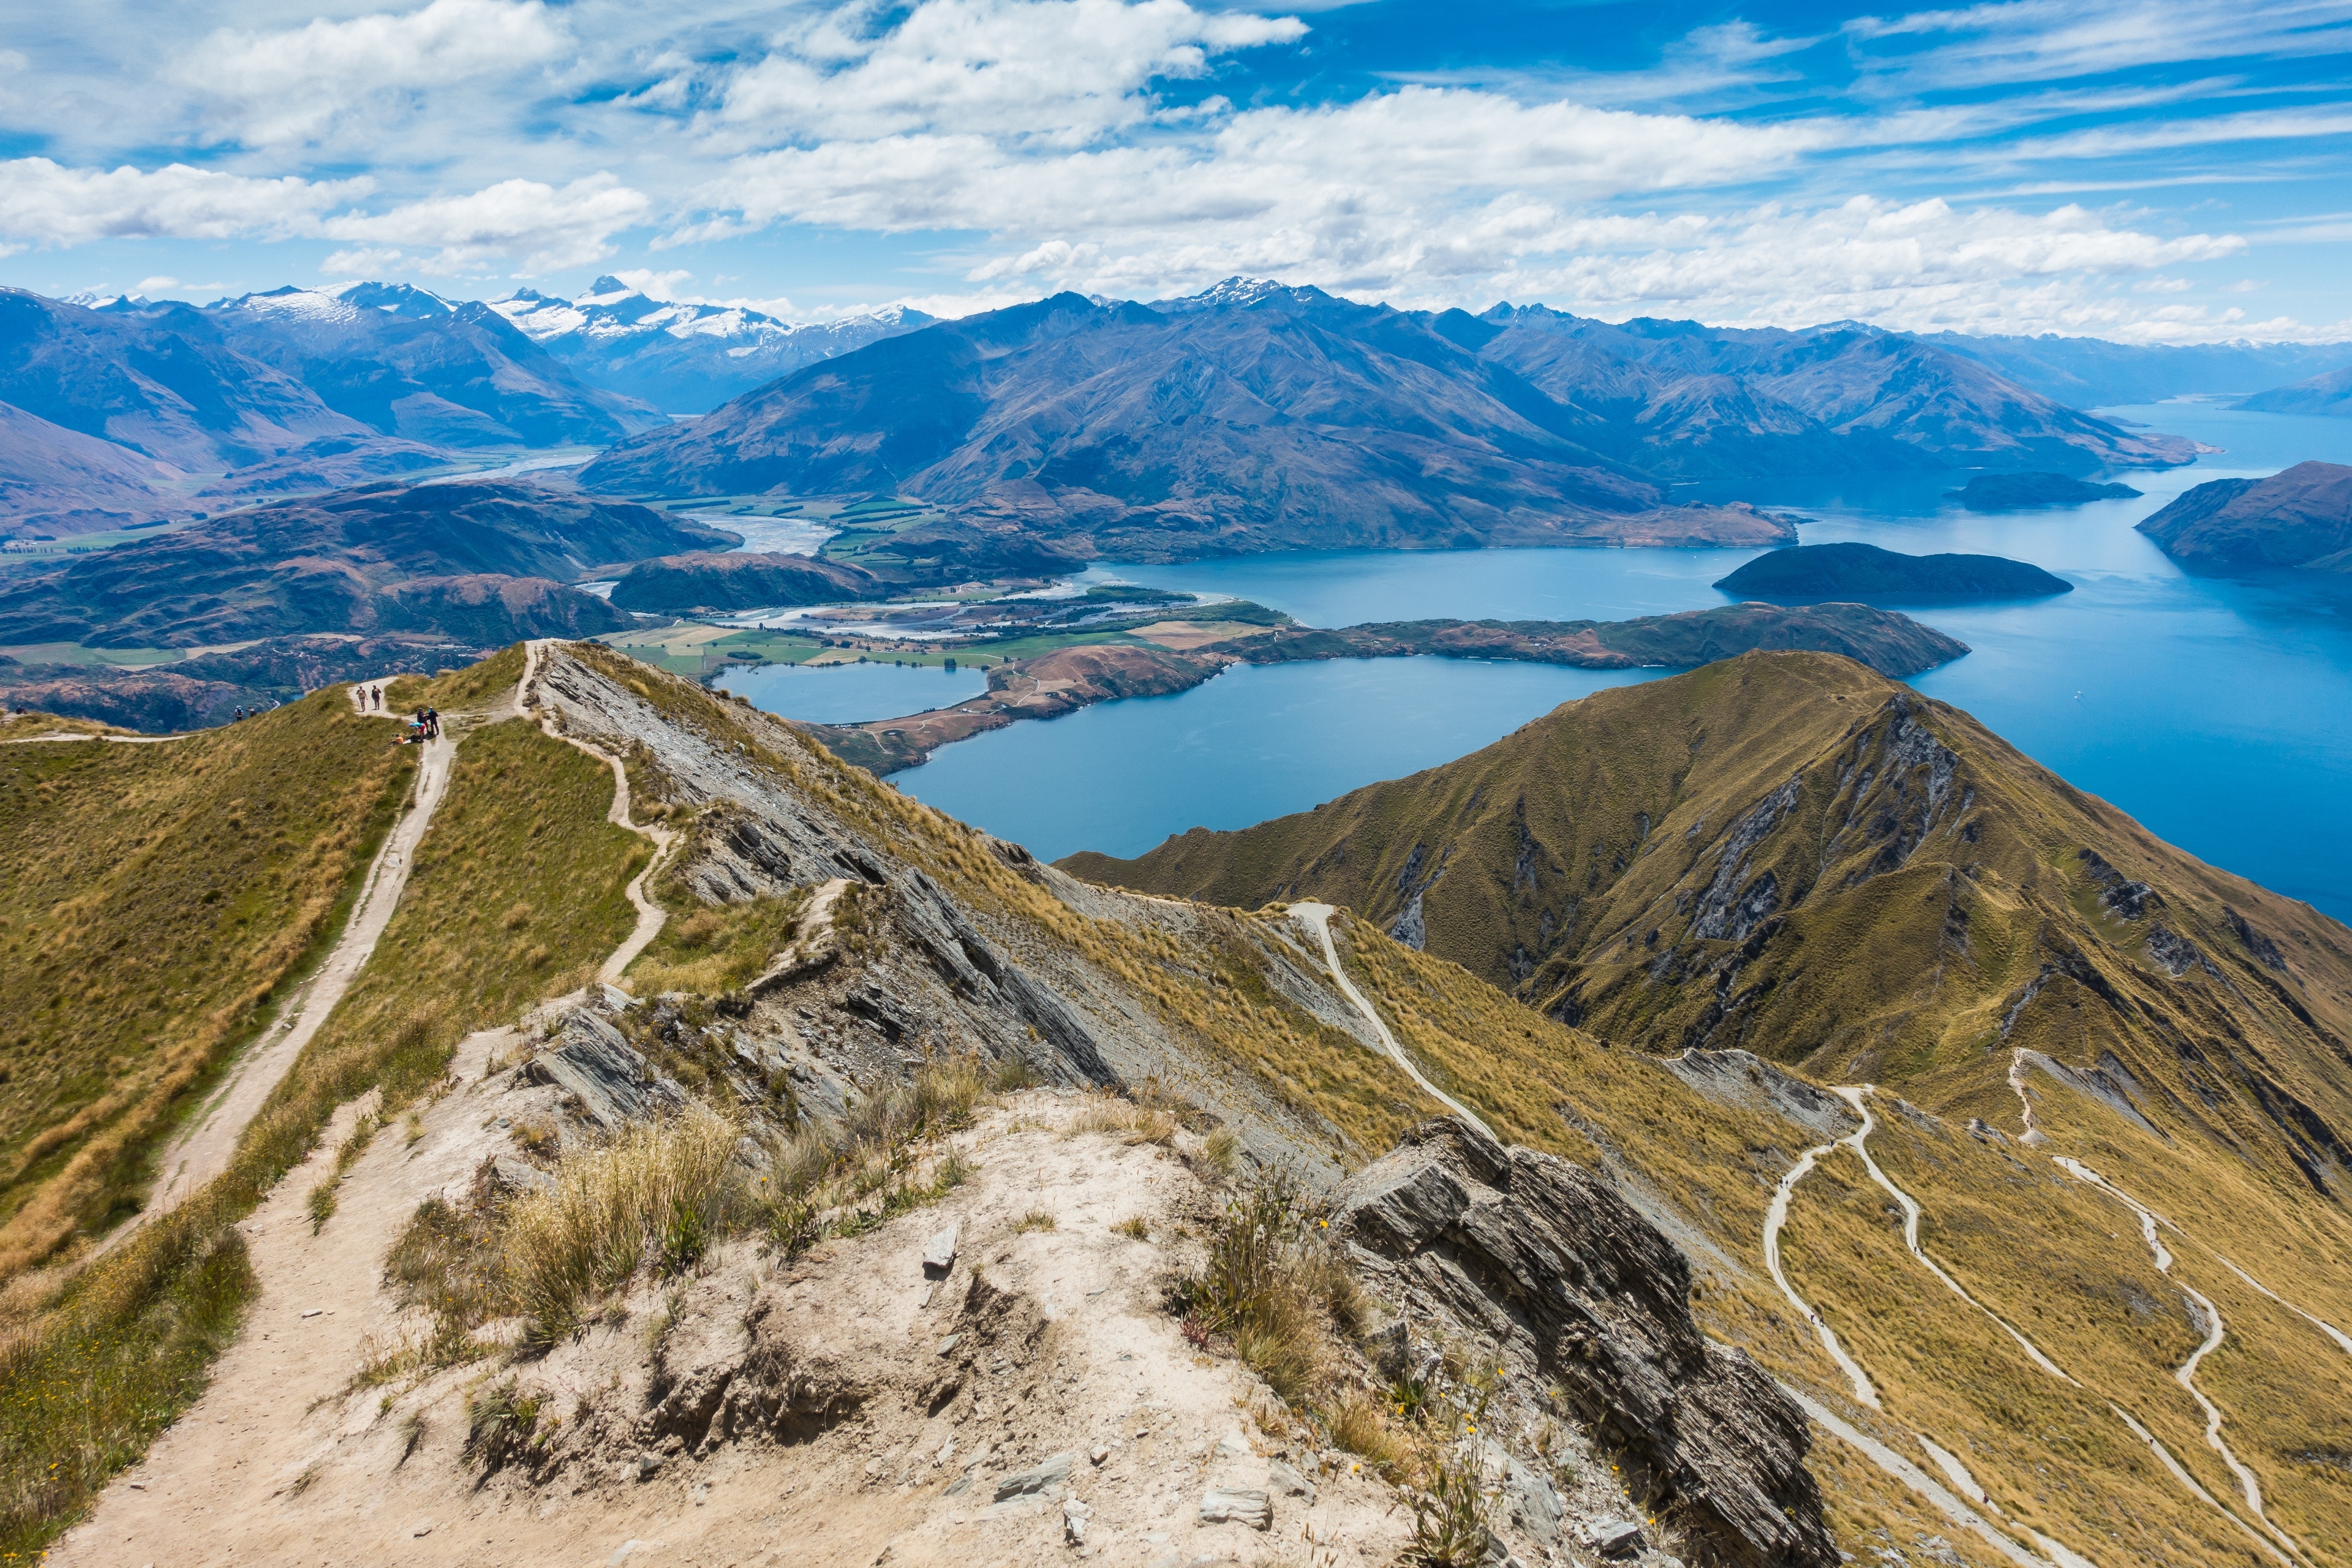 The view down the trail from the top of Roy's Peak just outside of Wanaka in New Zealand on our epic road trip around the South Island. 
#OnTheRoad